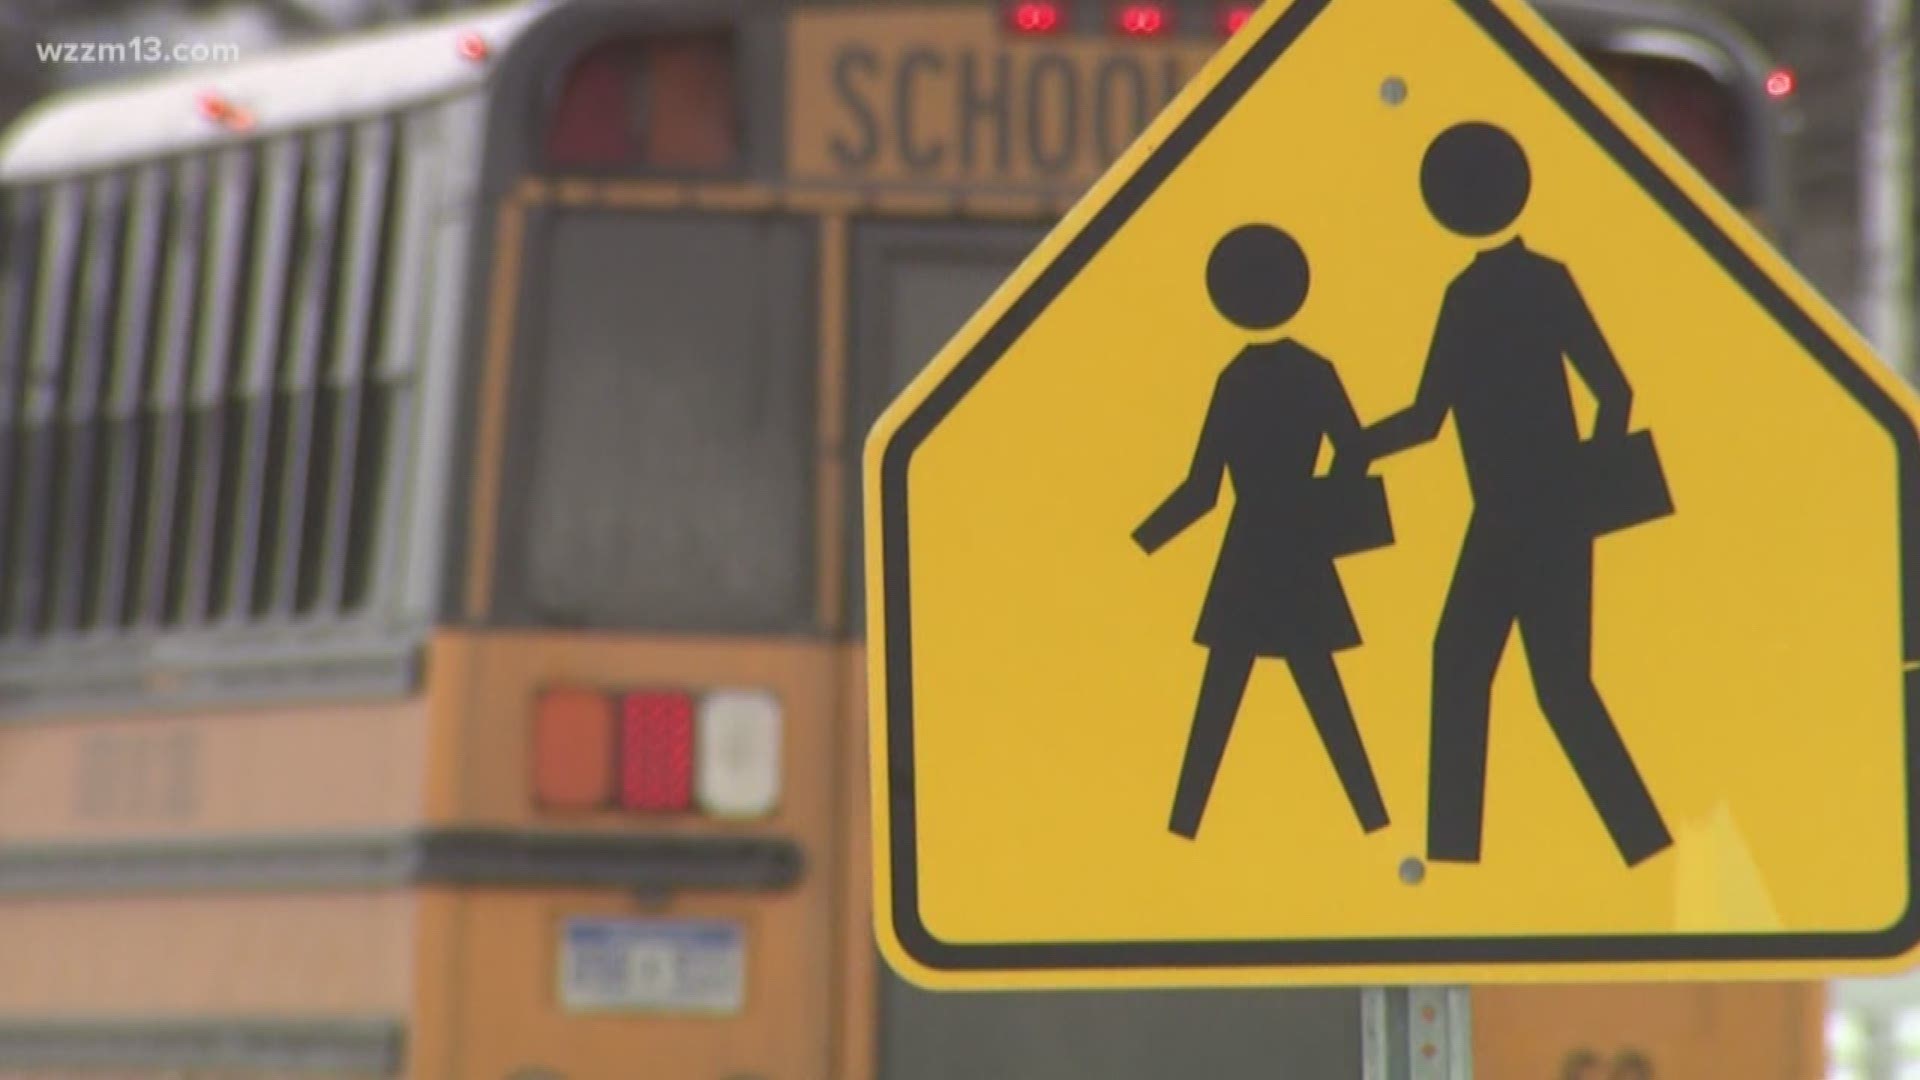 School districts facing make-up days following snow days